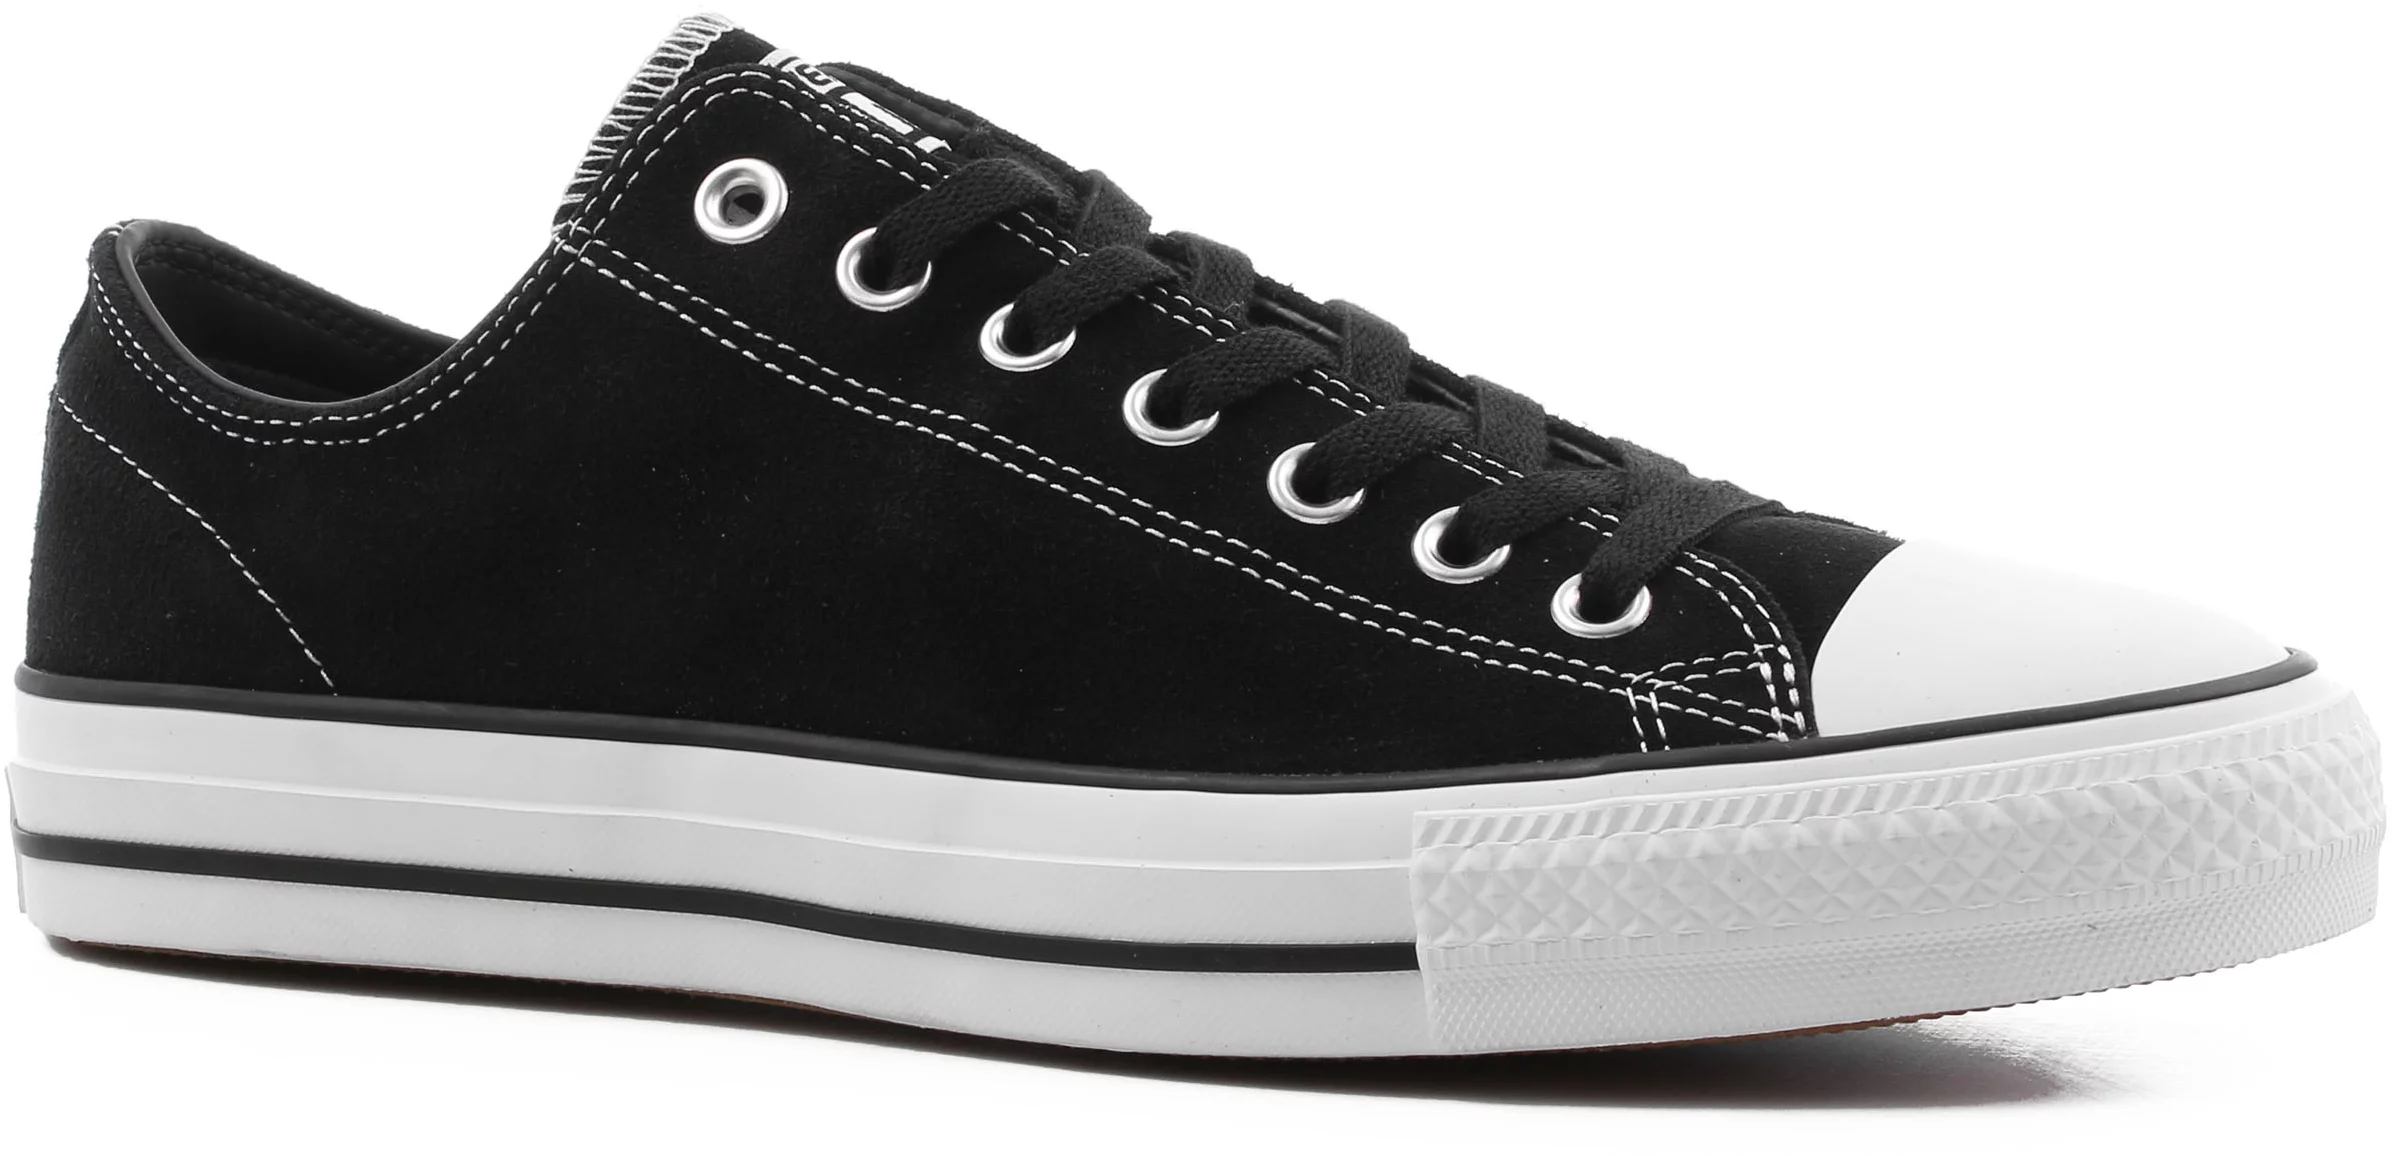 Molester Correct Zeeziekte Converse Chuck Taylor All Star Pro Skate Shoes - (suede) black/black/white  - Free Shipping | Tactics